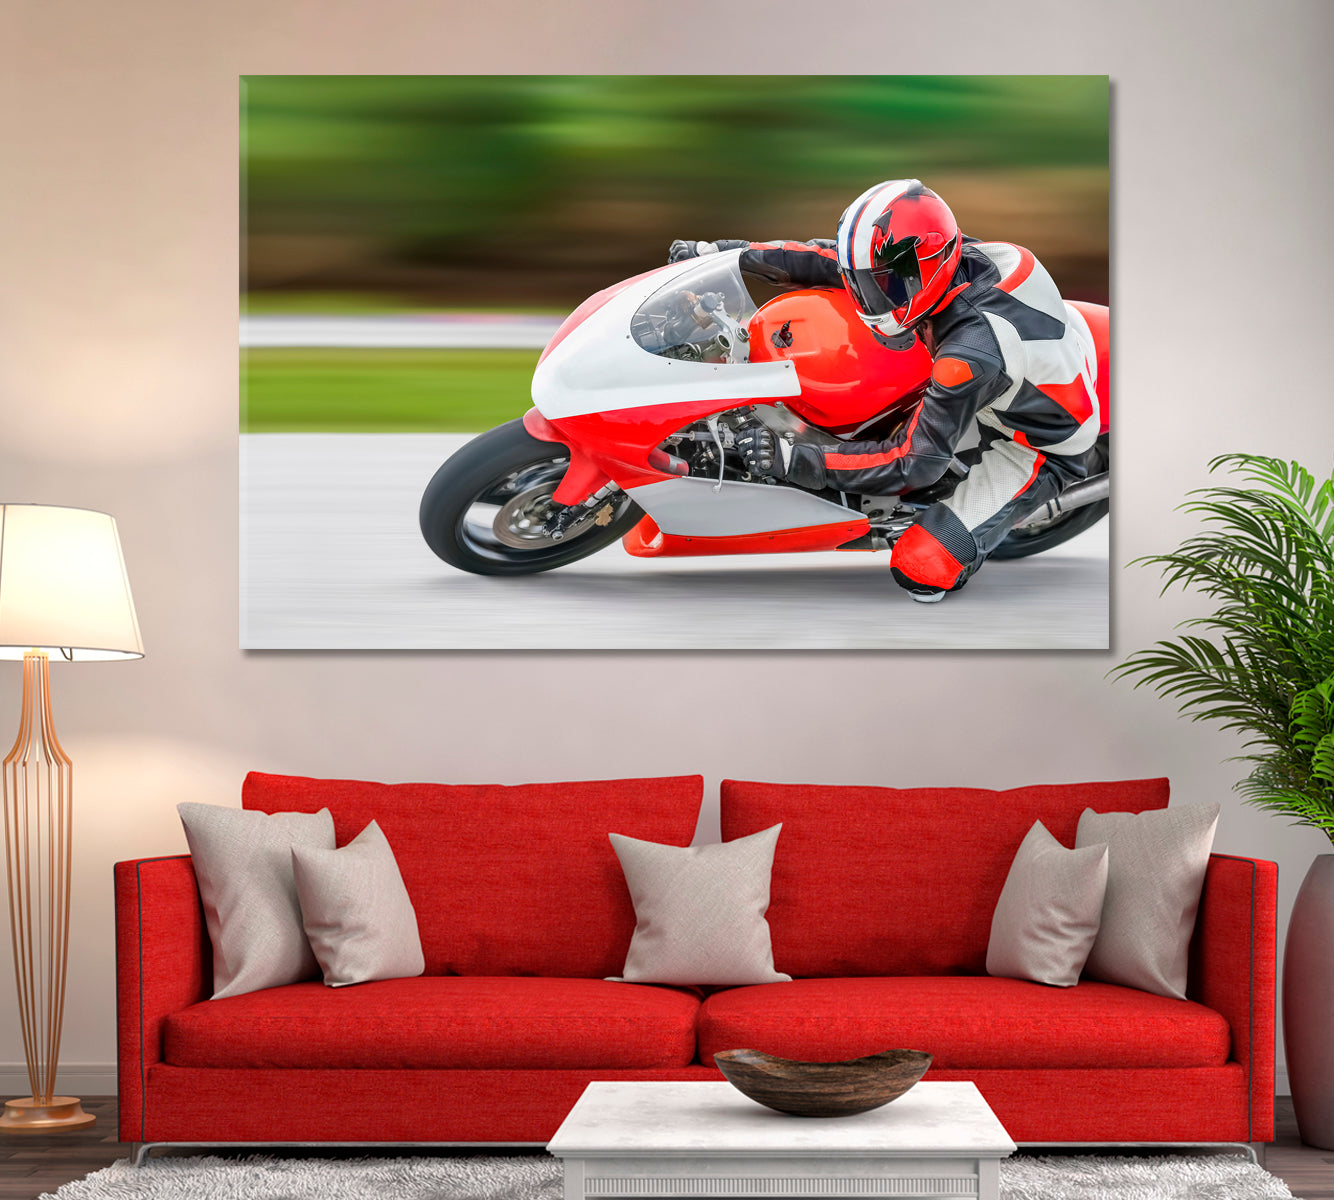 Motorcyclist on Track Canvas Print ArtLexy 1 Panel 24"x16" inches 